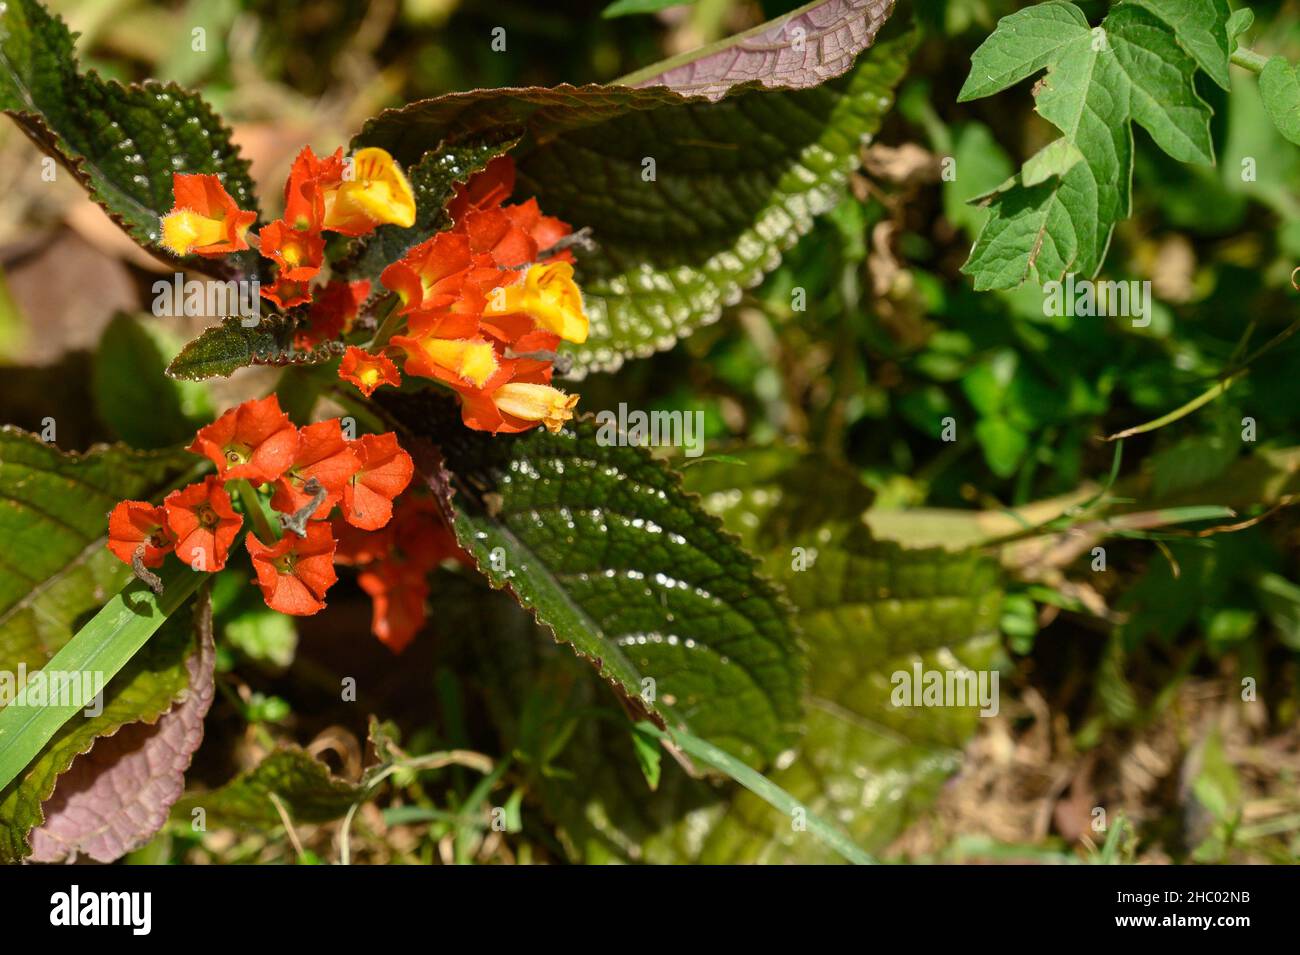 Photo of begonia taken in the Dominican Republic. The picture shows a beautiful flower with red and yellow petals. The view of the photo is directed t Stock Photo